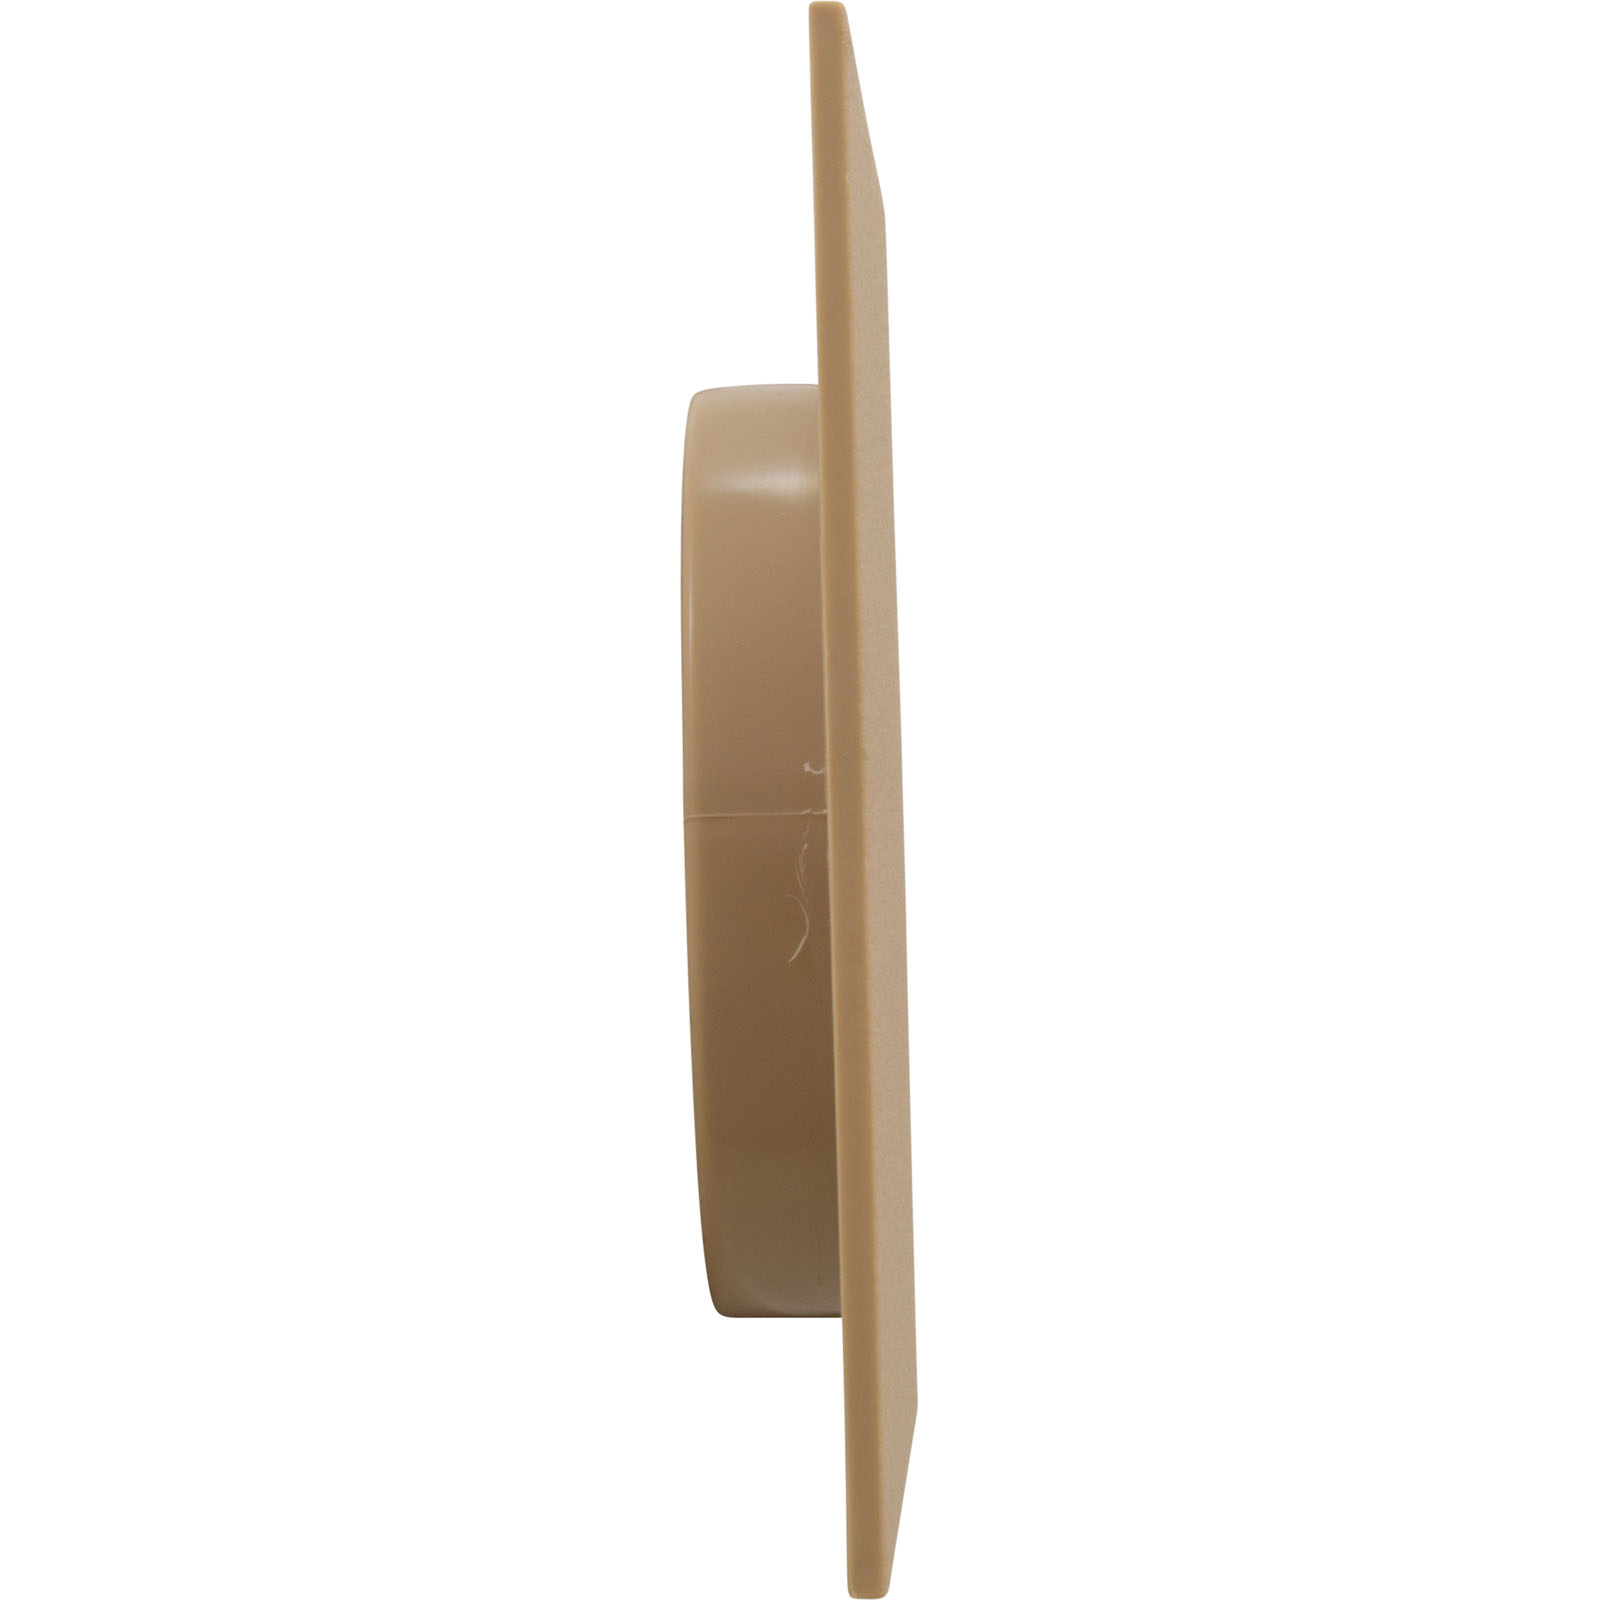 Picture of 25597-000-129 Cover CMP Deck Jet J-Style Square Tan